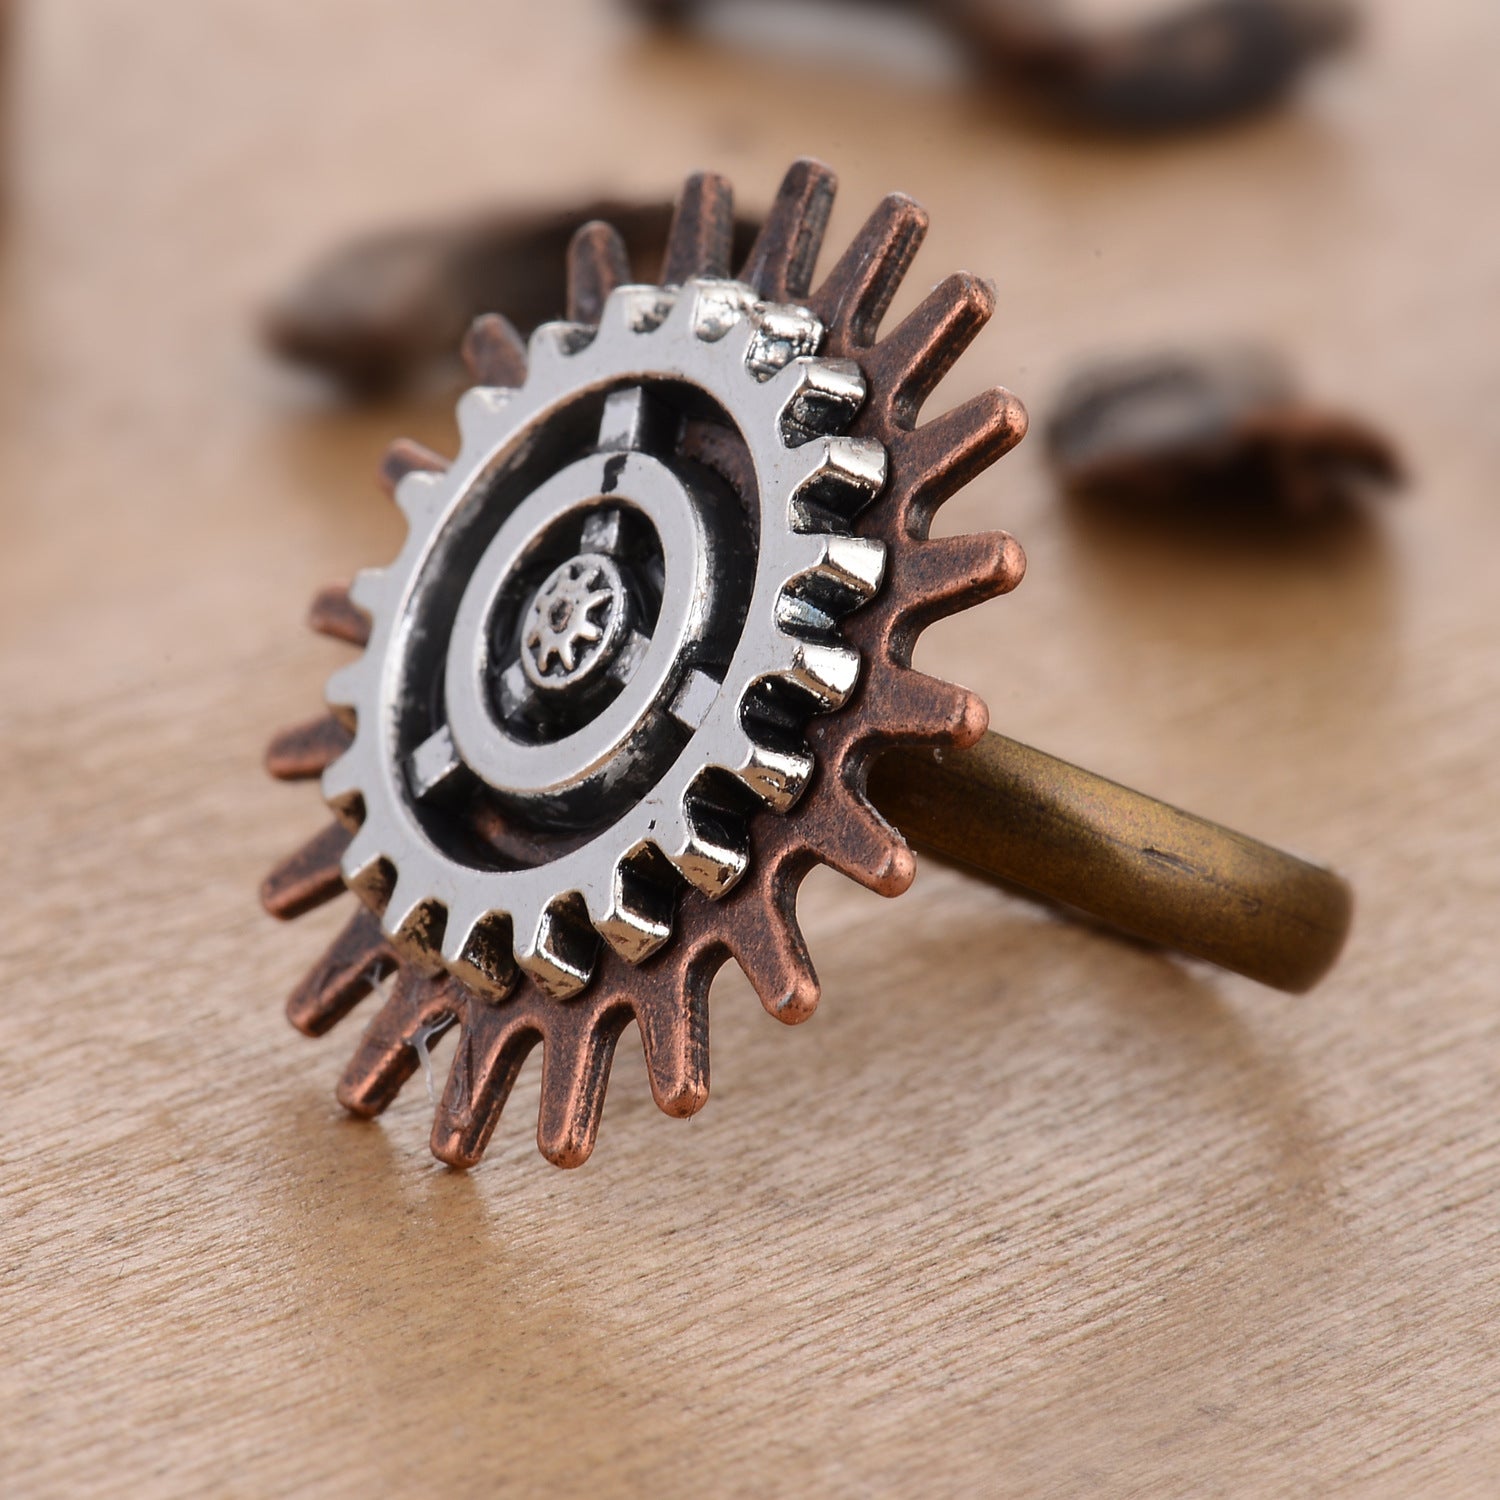 A woman's hand with a Retro Steampunk 3 Ring Gear Ring Jewelry by Maramalive™ on it.